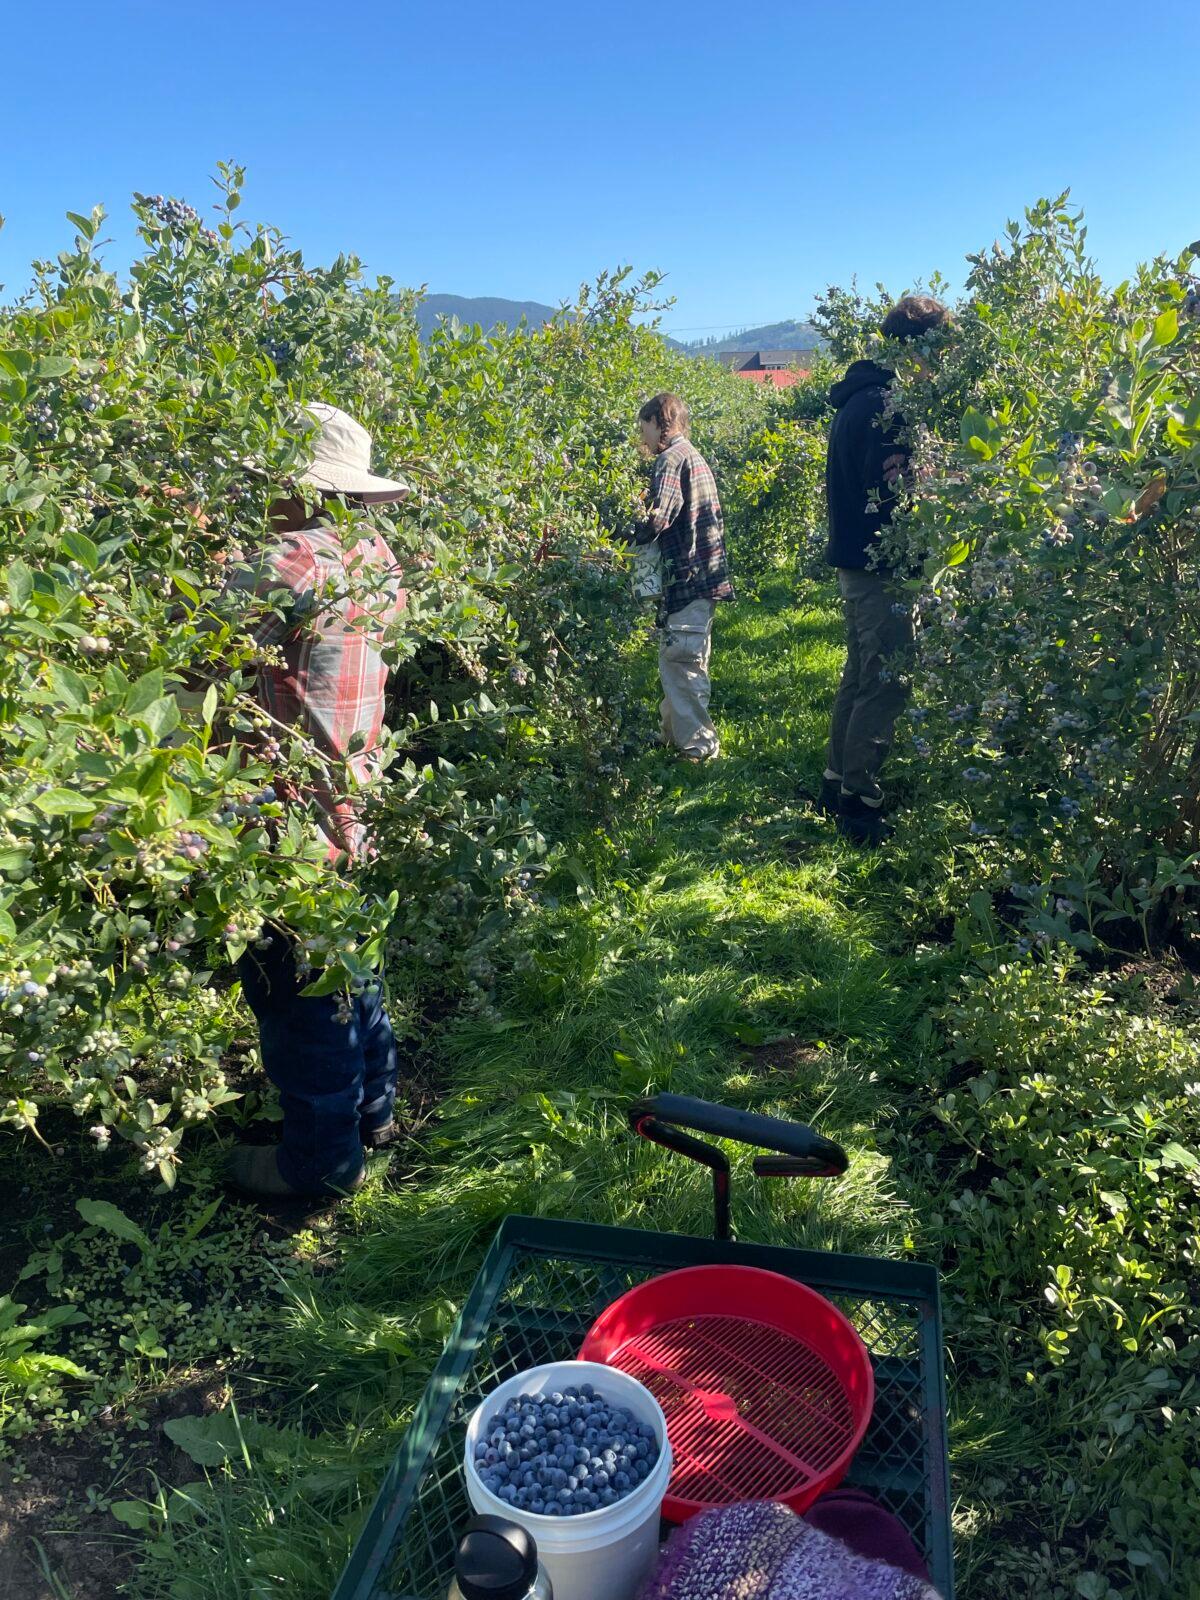 Pablo Silva (L), long-time field manager at Bow Hill and owner of Silva Family Farms, leads his team of pickers to get started on this year's harvest. (Courtesy of Bow Hill Blueberries)